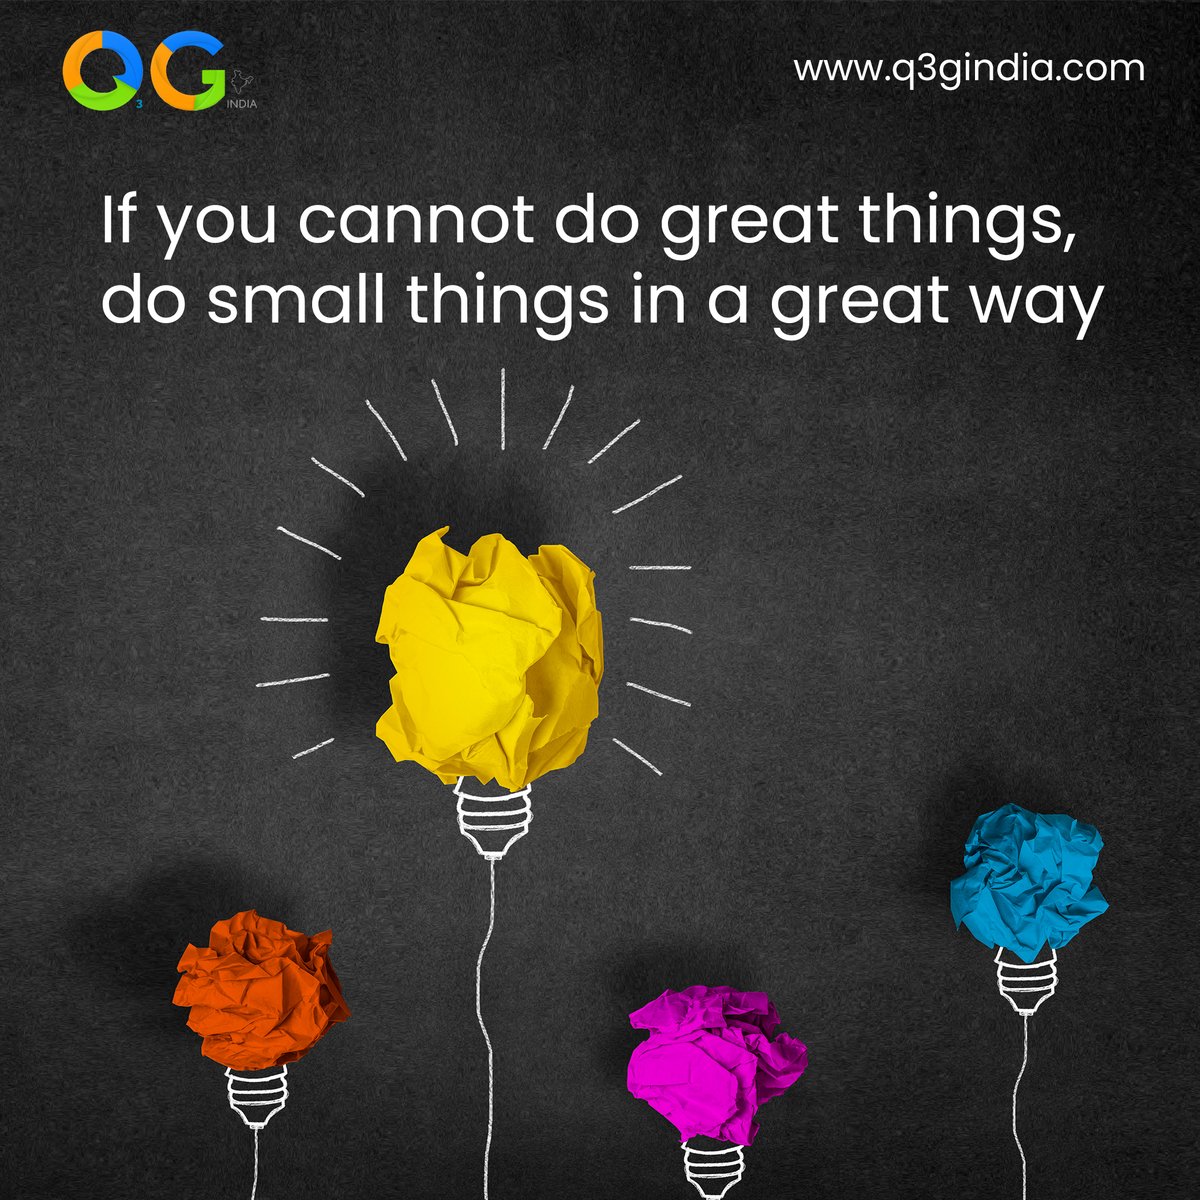 Set small and realistic #goals that boost you up towards your bigger #targets!
.
.
#Q3GIndia #goal #wednesday #wednesdaymood #wednesdayvibes #WednesdayWisdom #wednesdaywisdom #wednesdaymotivation #wednesdayquote #achieveyourgoals #achievement #achievetargets